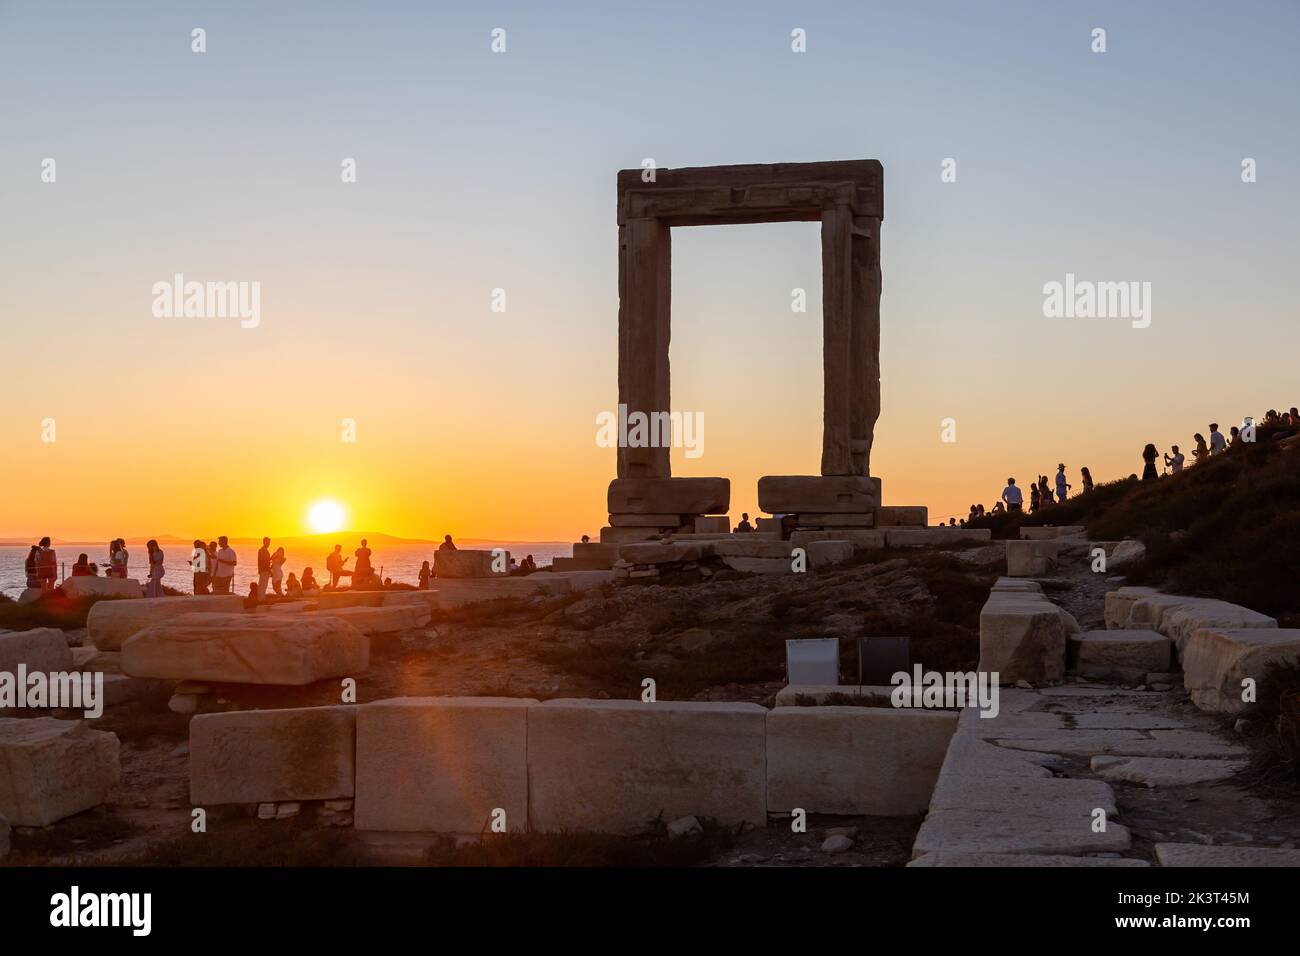 Naxos island, sunset over Temple of Apollo, Cyclades Greece. People enjoys the sundown from the islet of Palatia. Stock Photo